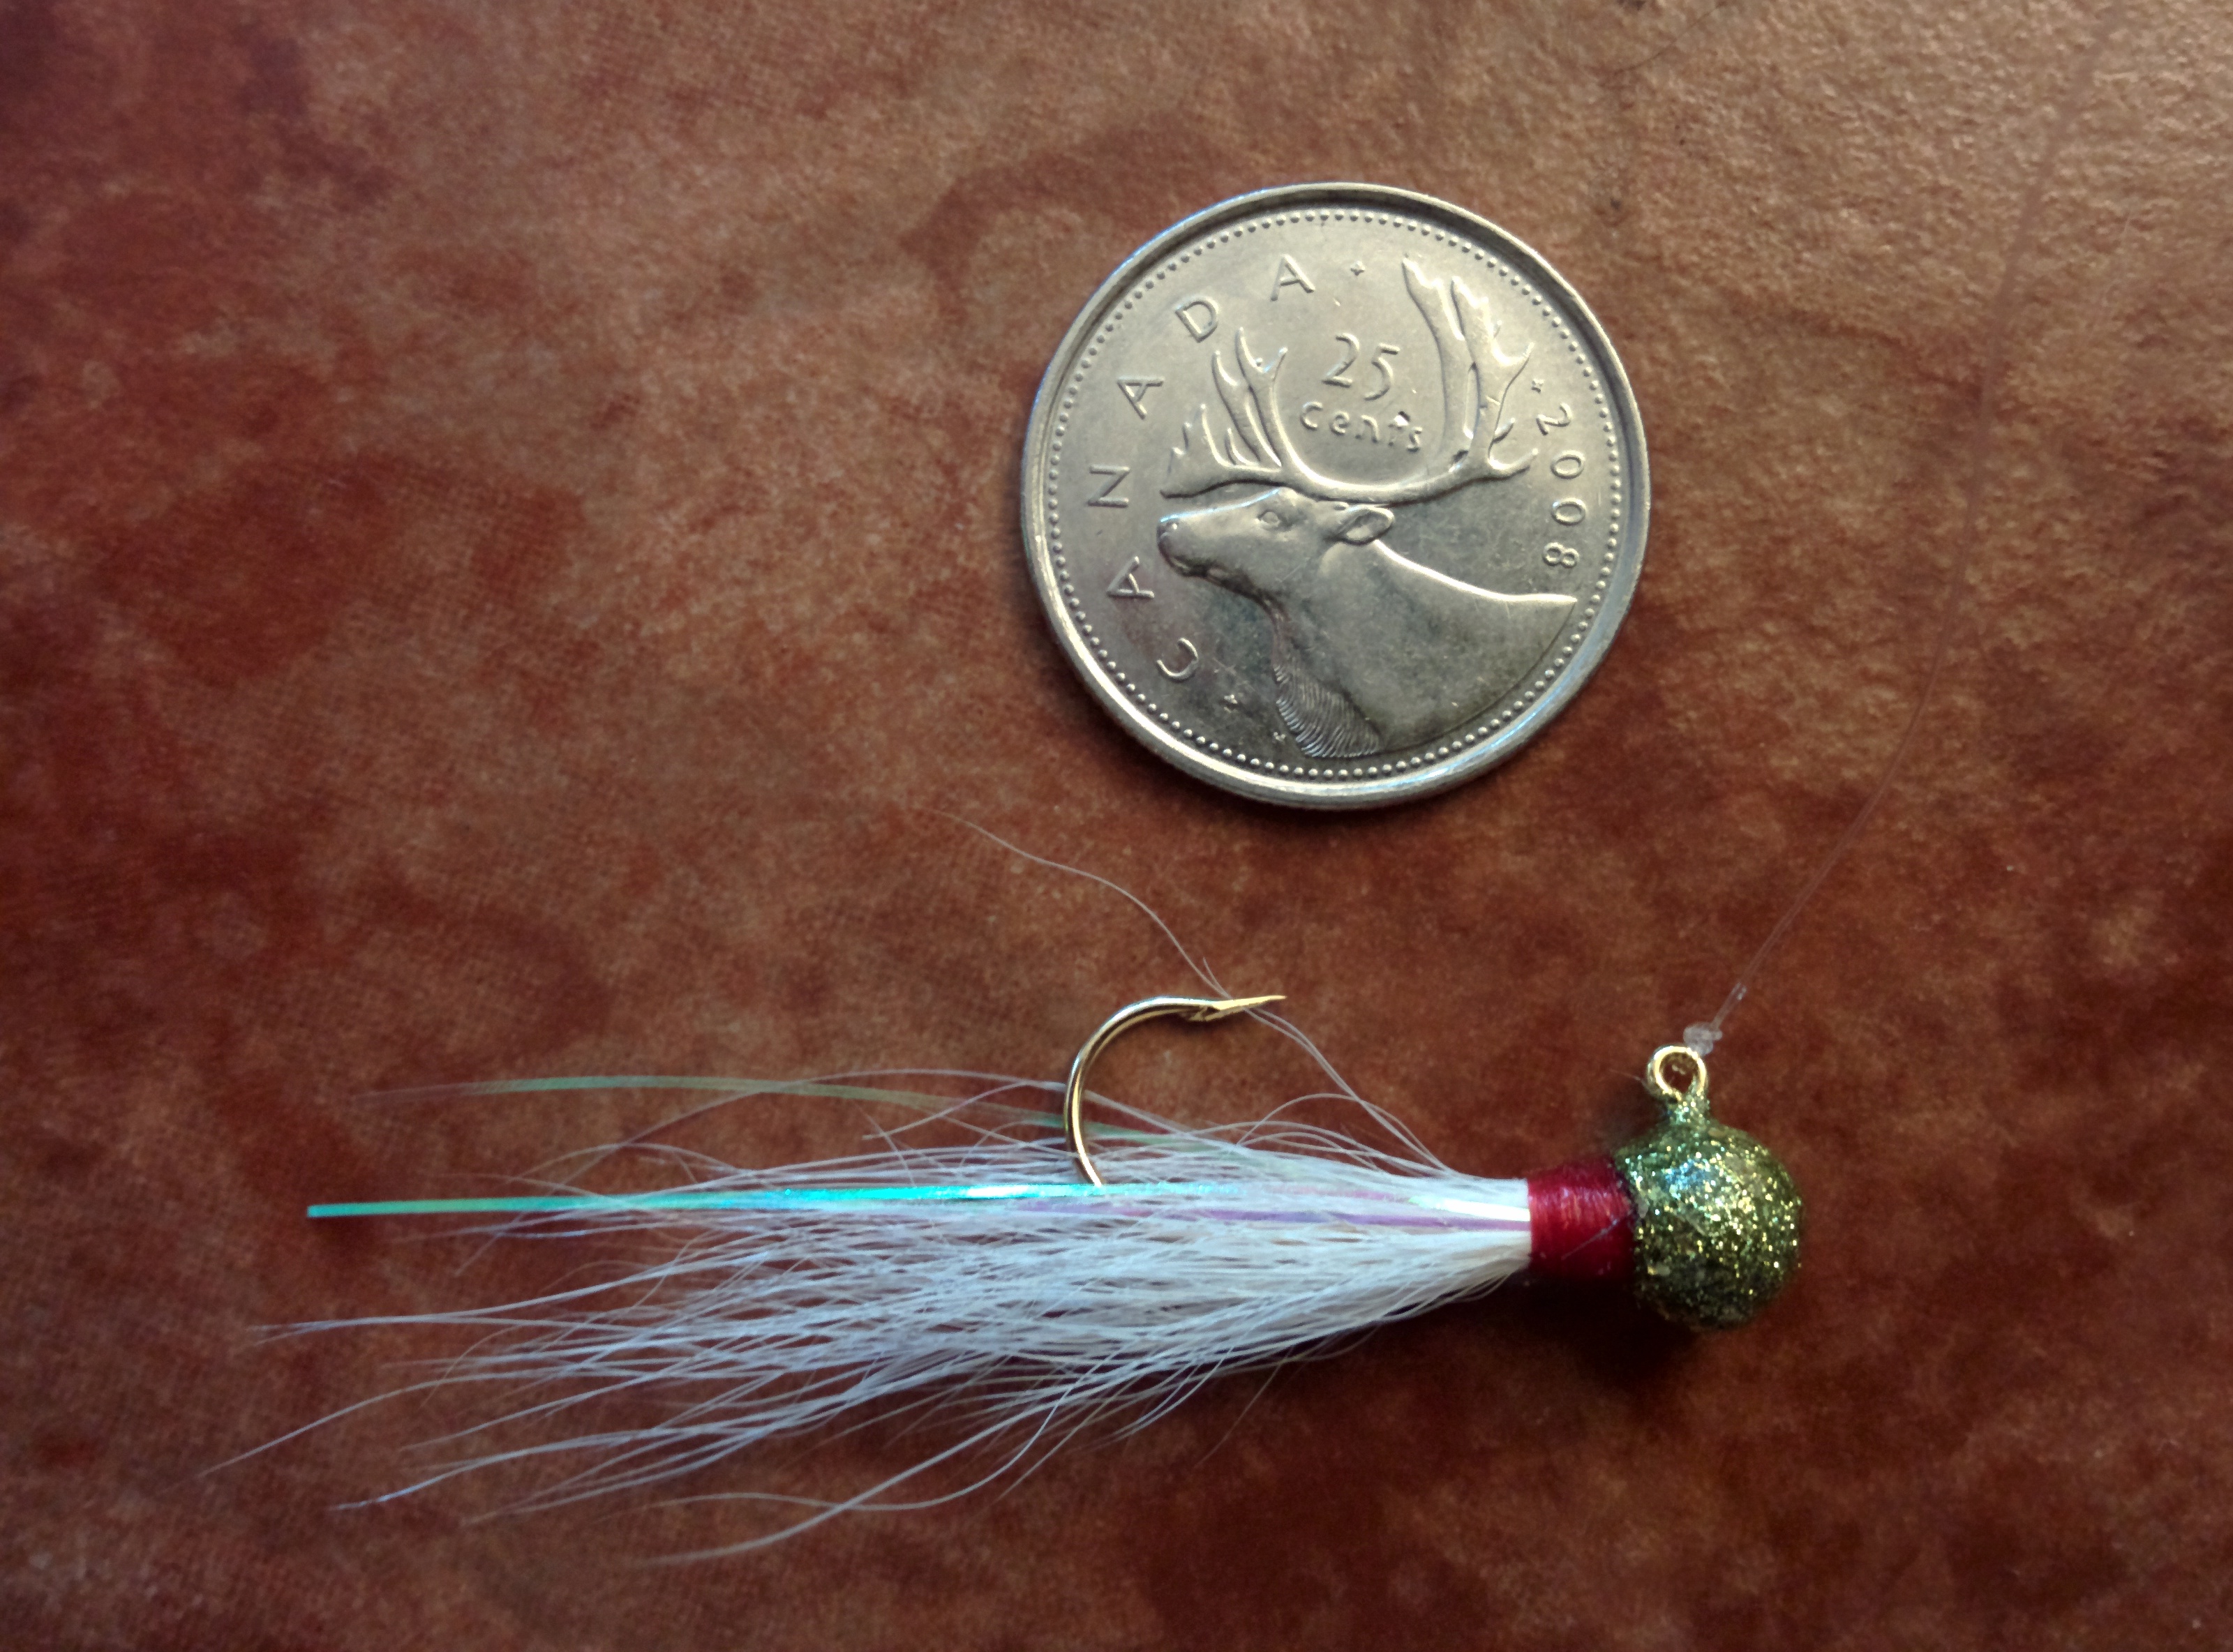 How to Fish A Bucktail Jig for Winter Flounder.